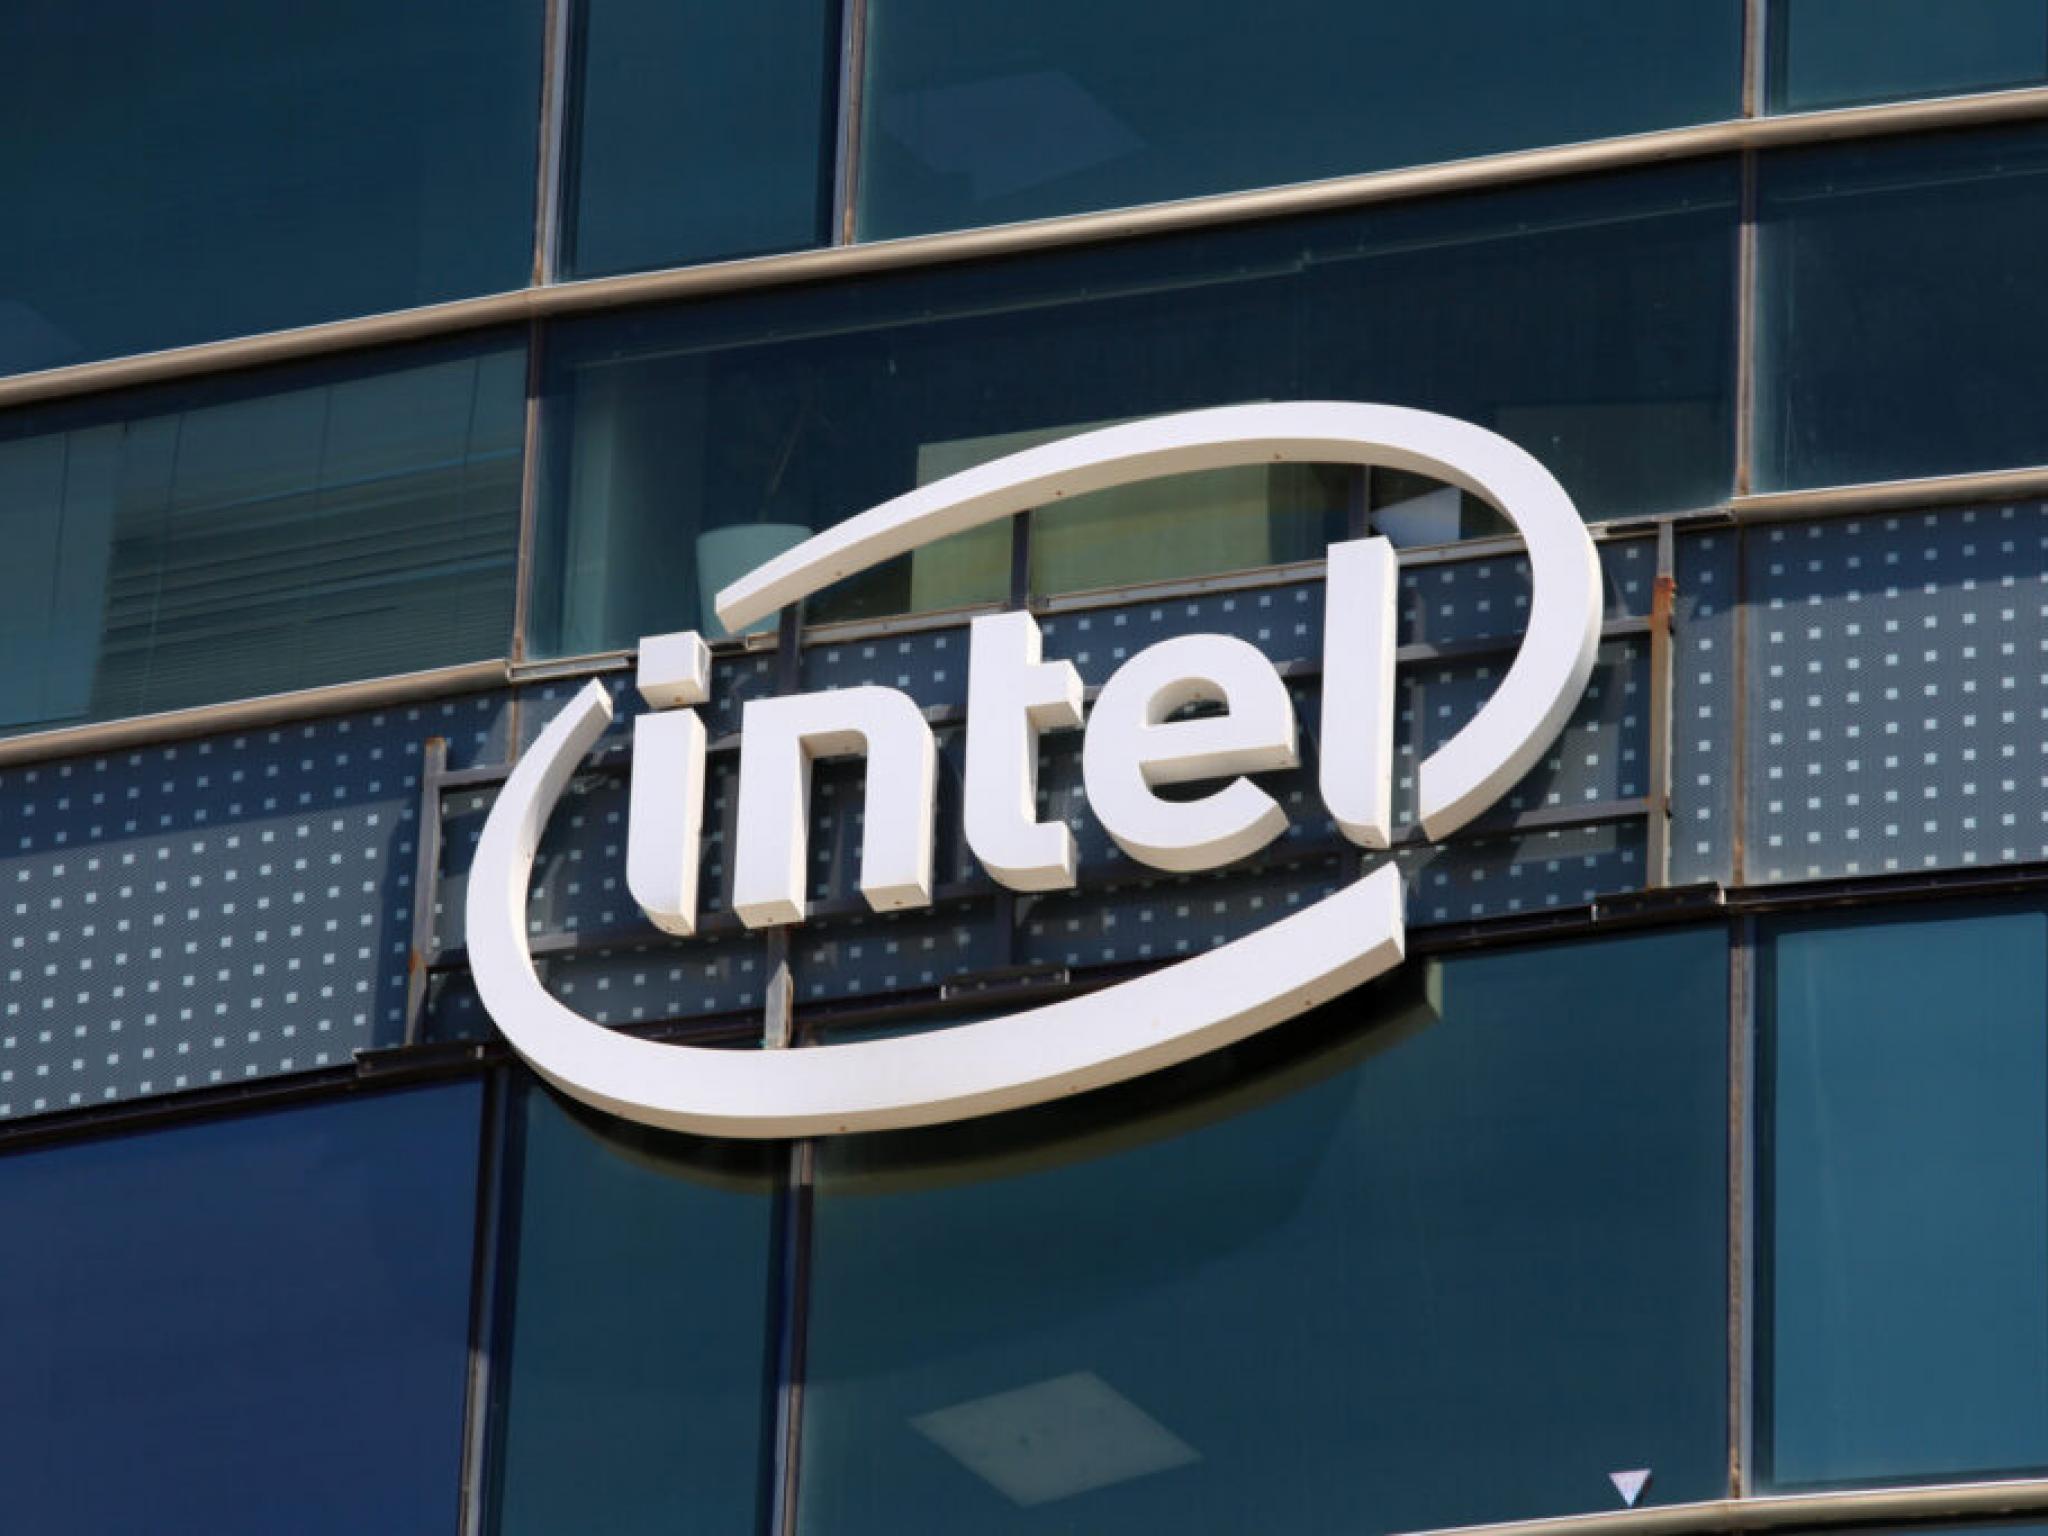  intel-still-a-work-in-progress-as-turnaround-efforts-take-root-analysts-say-after-q1-disappointment 